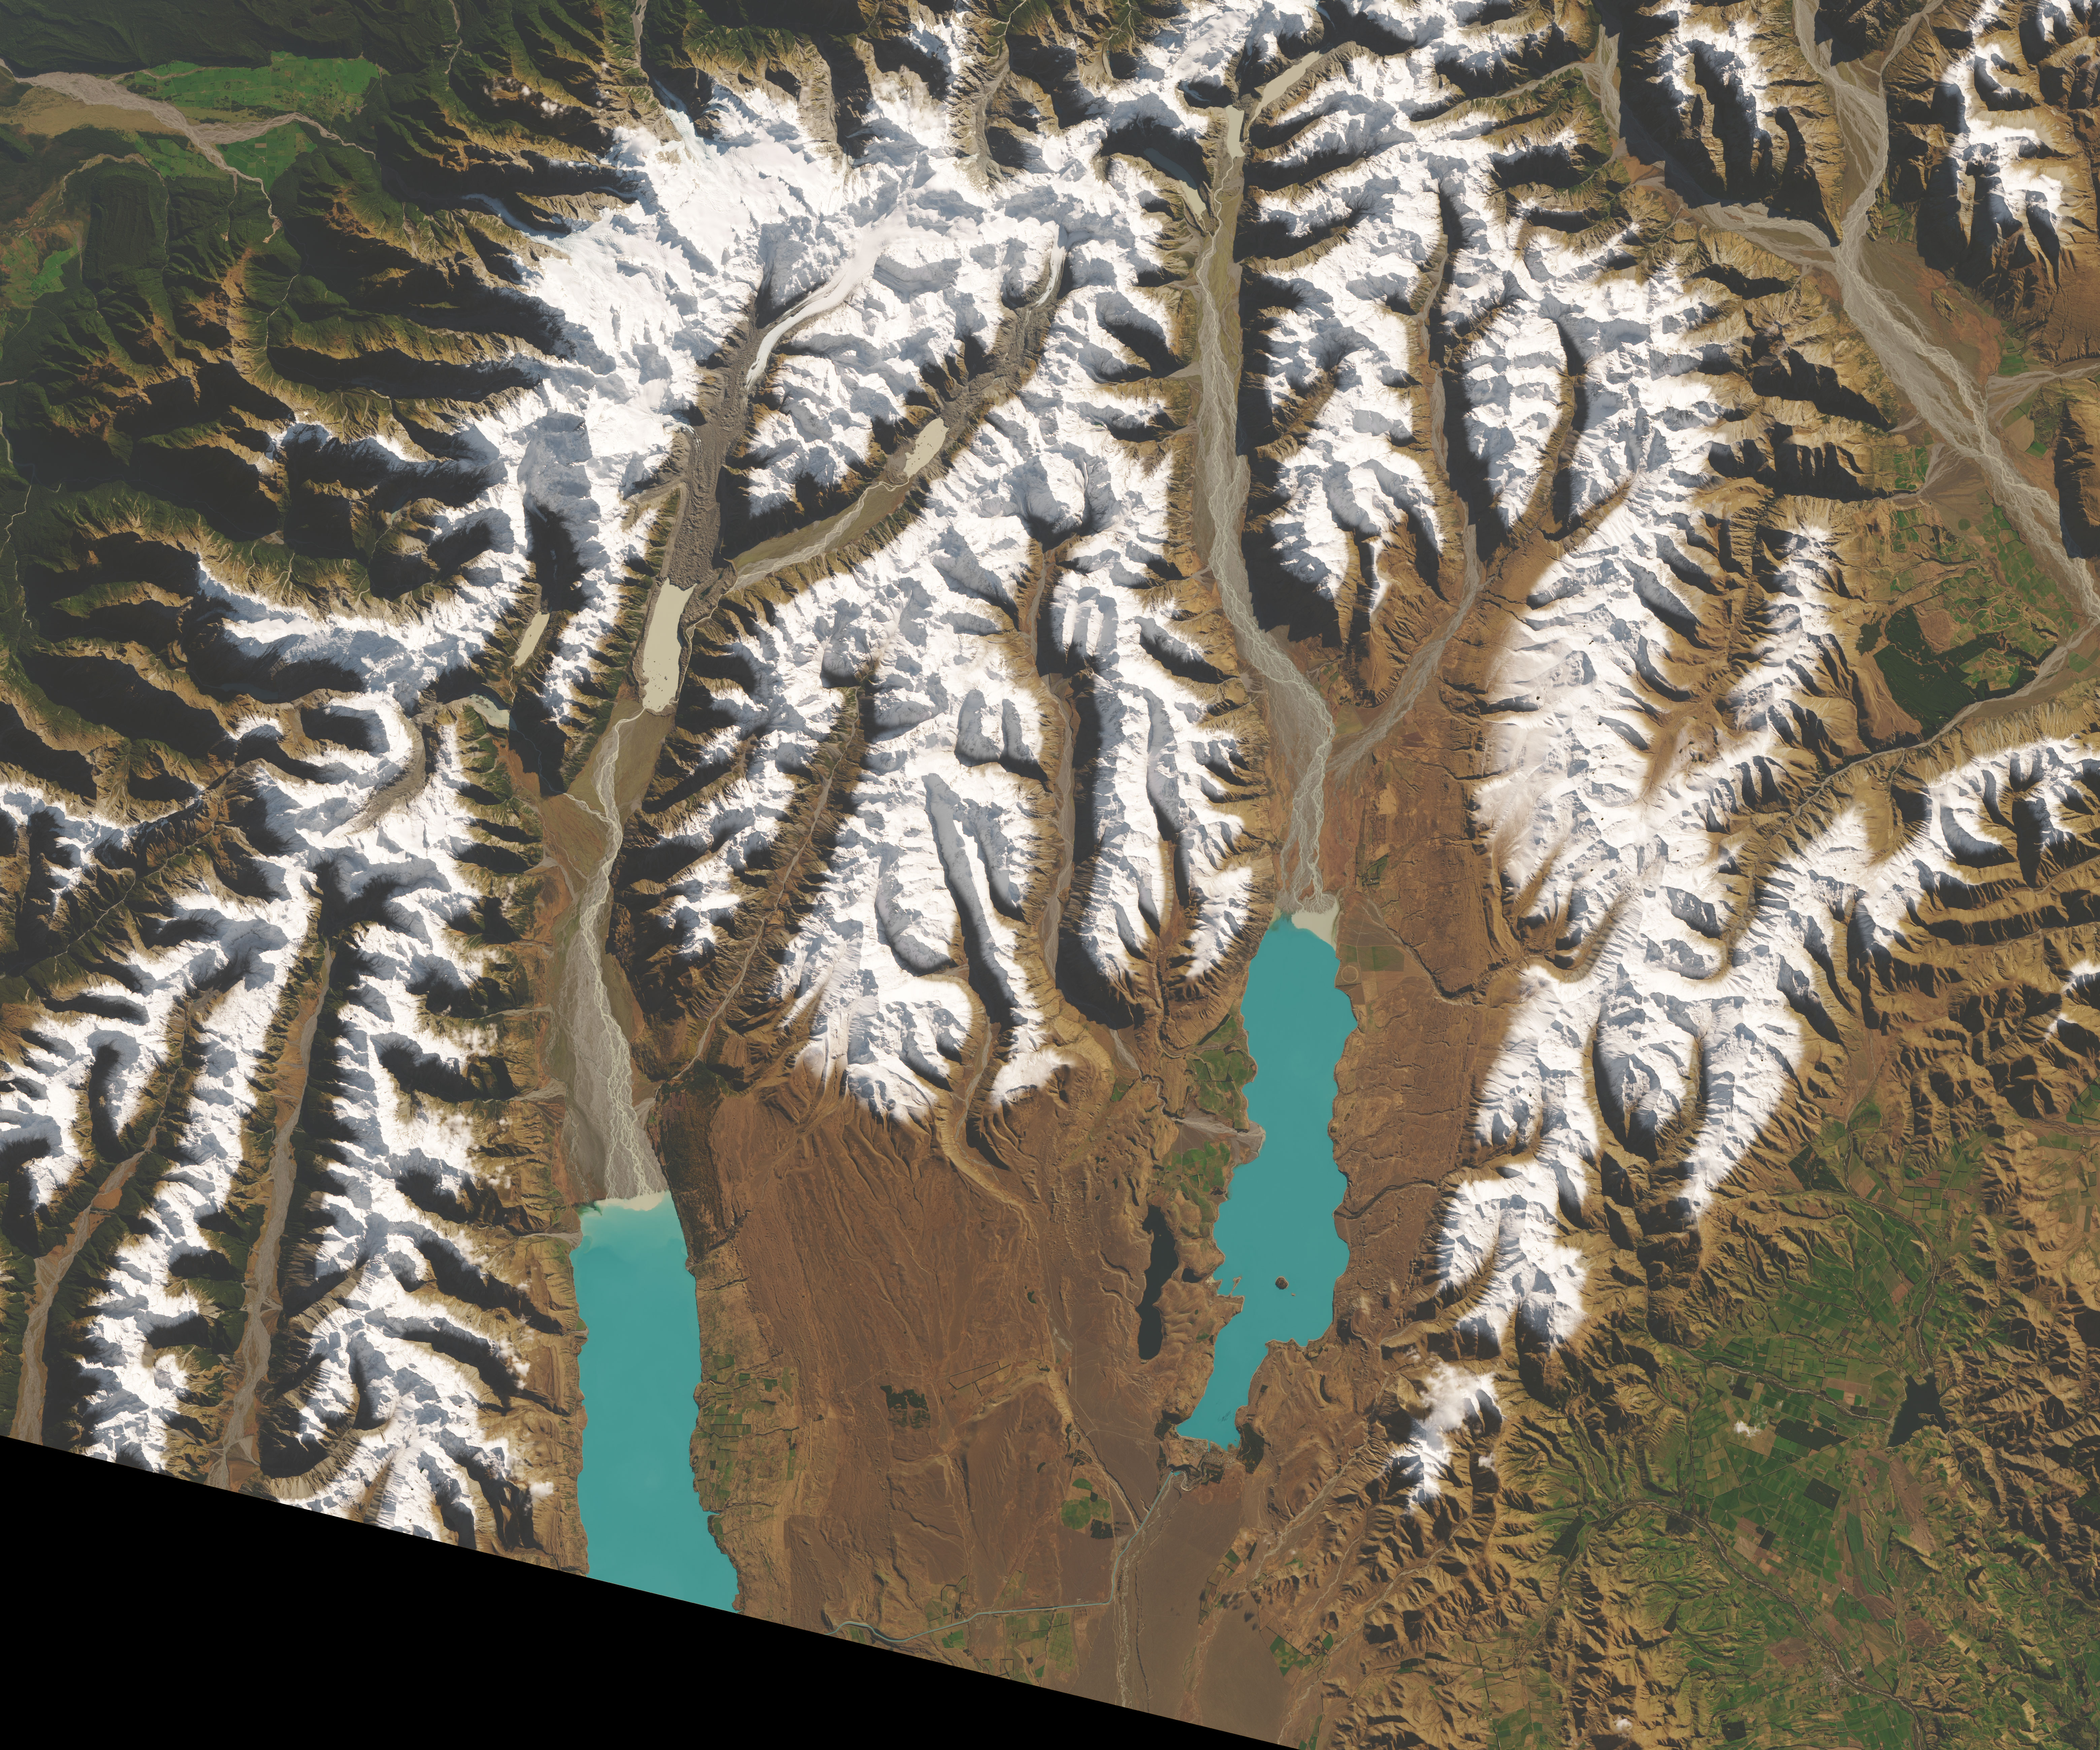 How Glaciers Turn Lakes Turquoise - related image preview